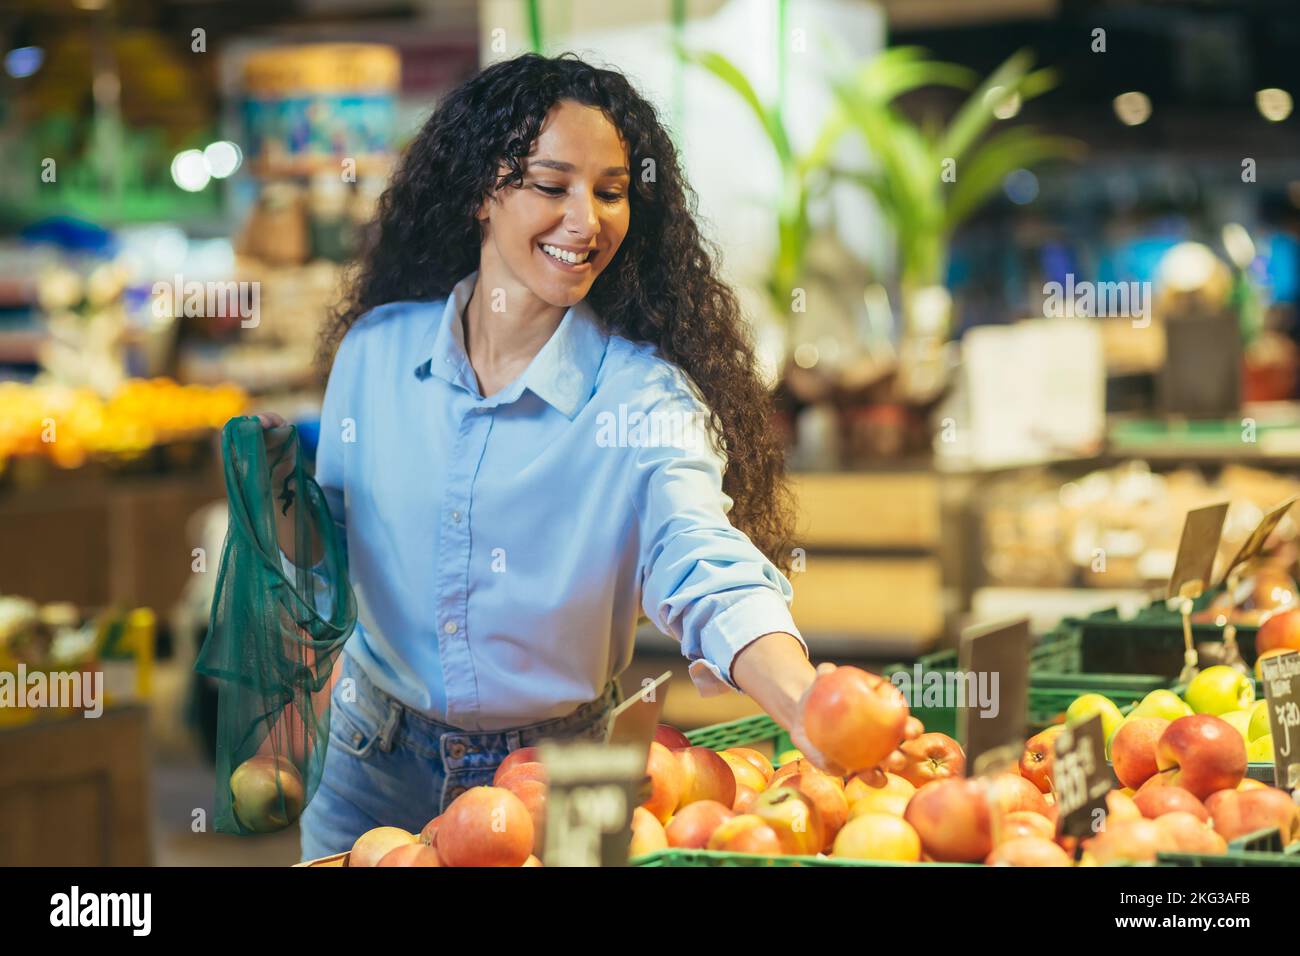 Happy woman buyer in supermarket, Latin American woman buys apples, fruits and vegetables, puts in an ecological bag. Stock Photo